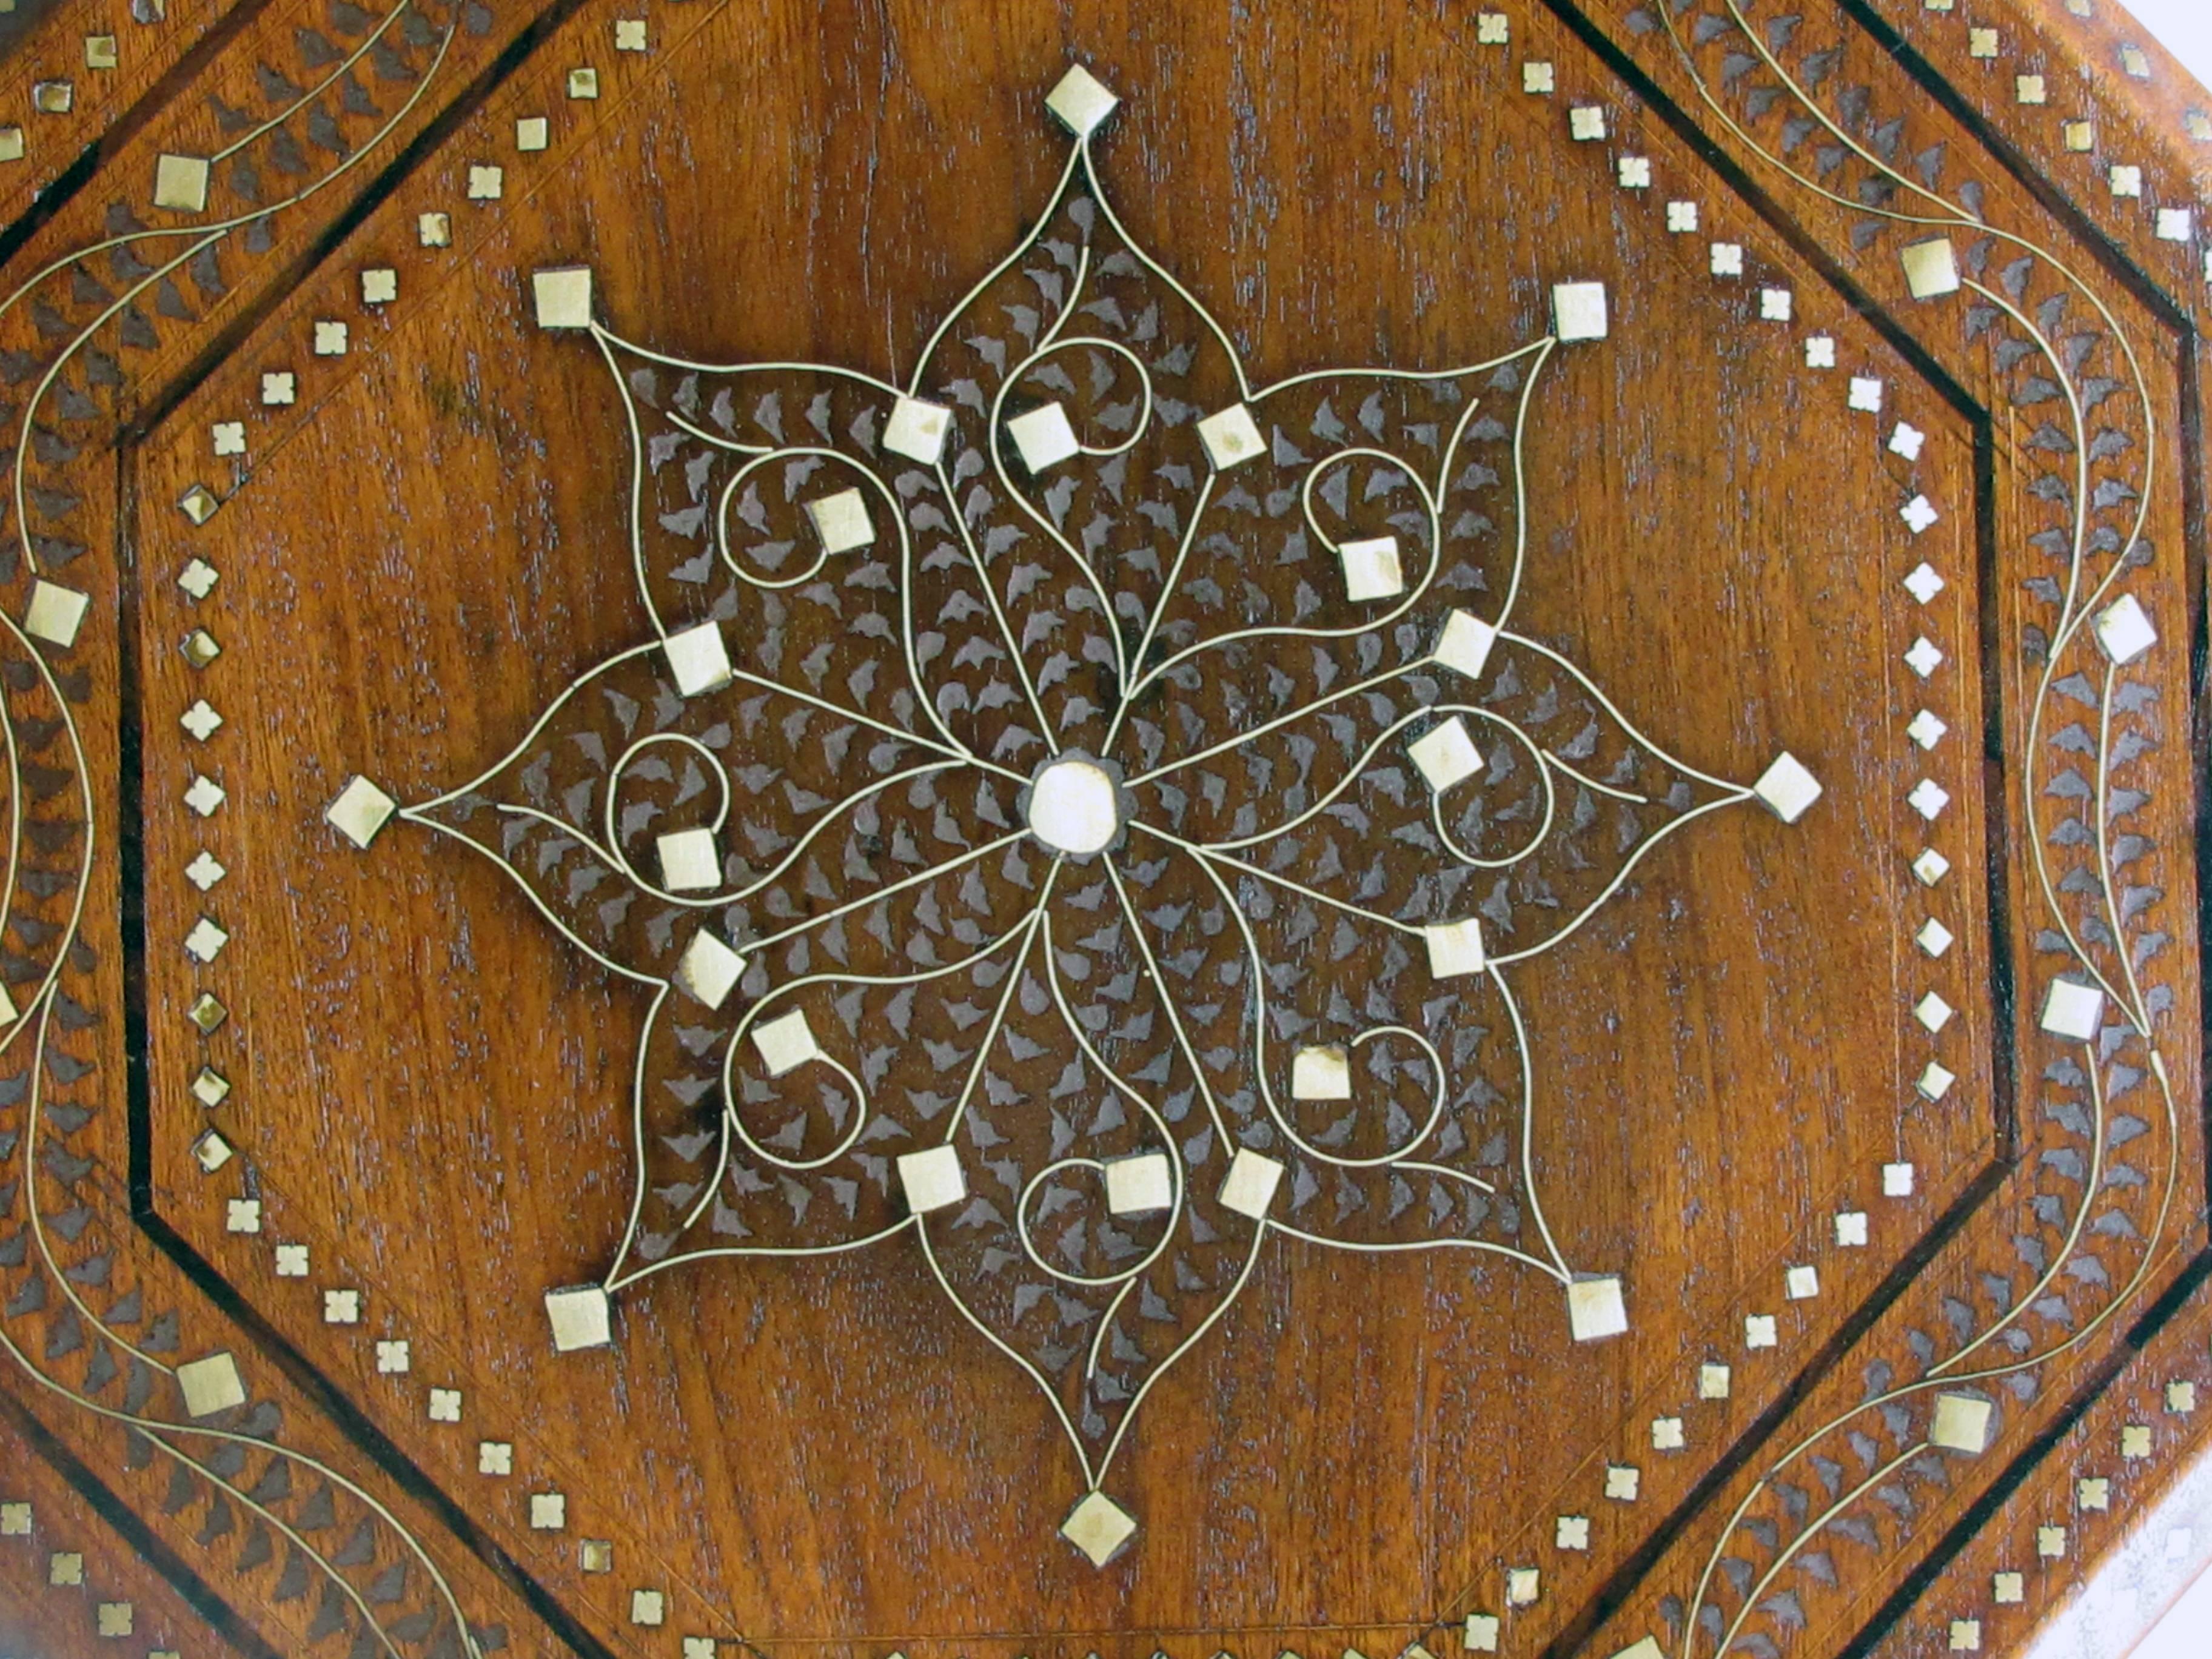 British Indian Ocean Territory Detailed Brass and Pewter Inlaid Octagonal Anglo-Indian Traveling Table